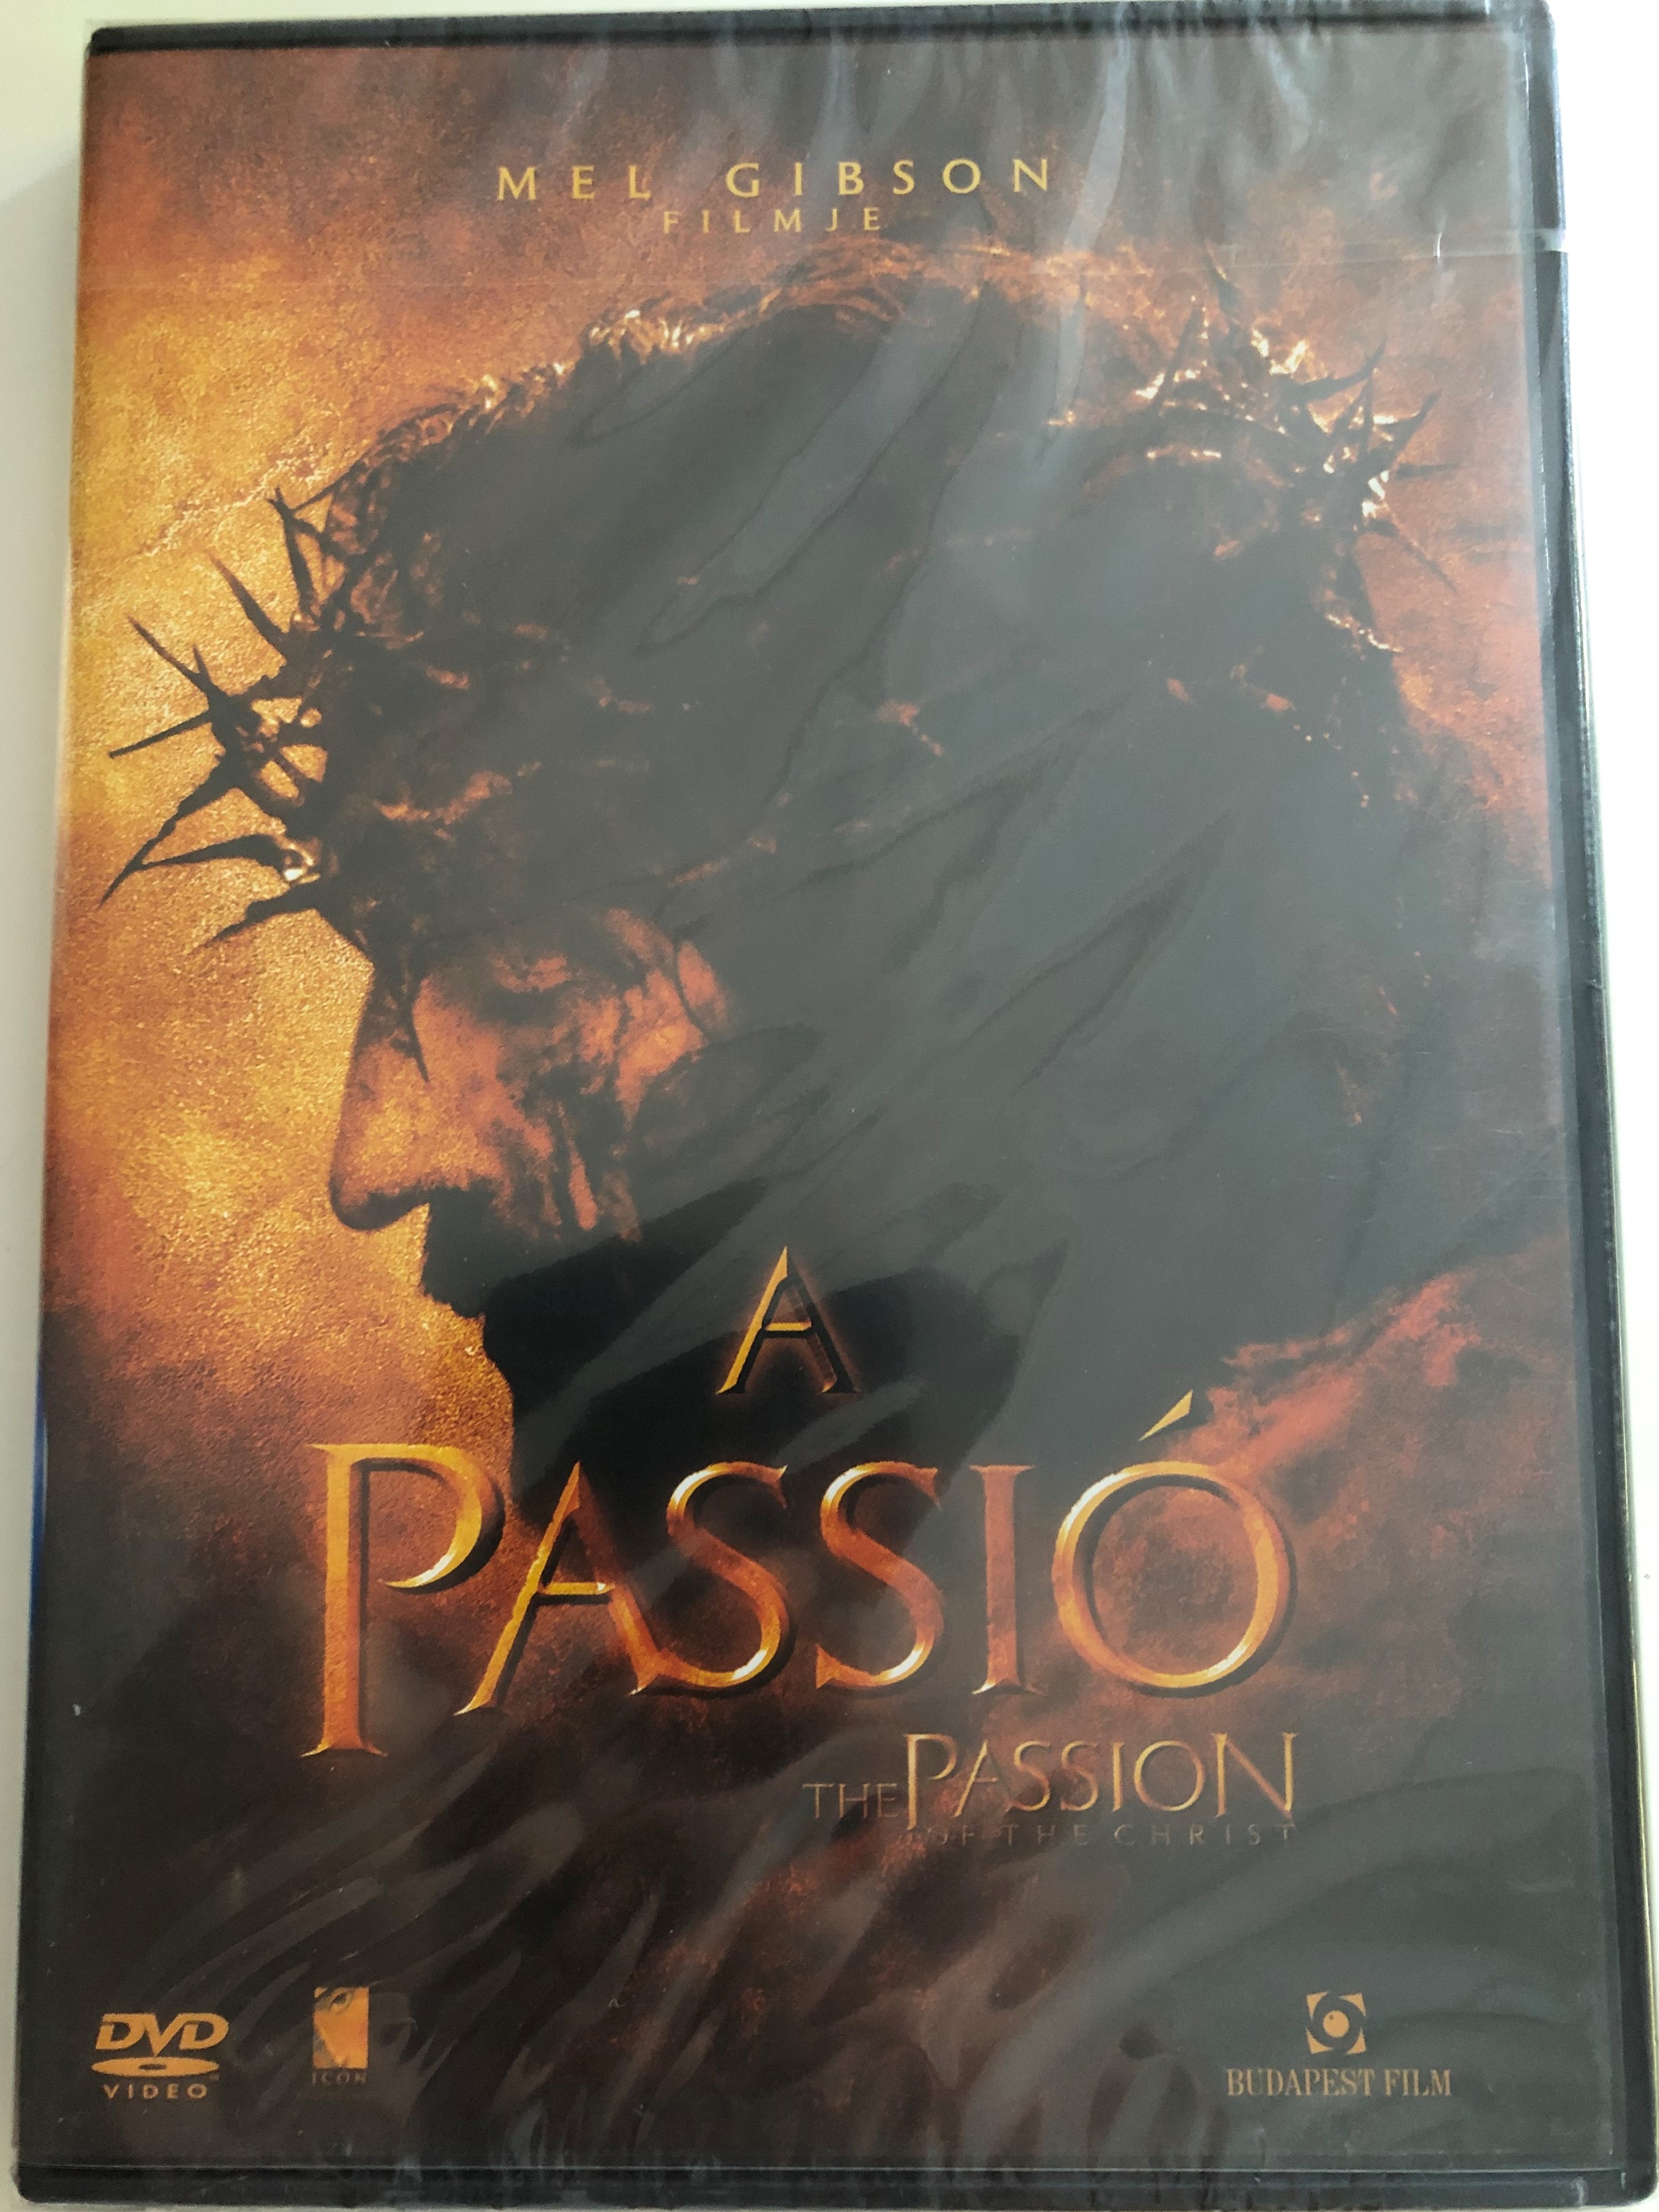 the-passion-of-the-christ-dvd-a-passi-mel-gibson-filmje-directed-by-mel-gibson-starring-jim-caviezel-monica-bellucci-maia-morgenstern-sergio-rubini-1-.jpg